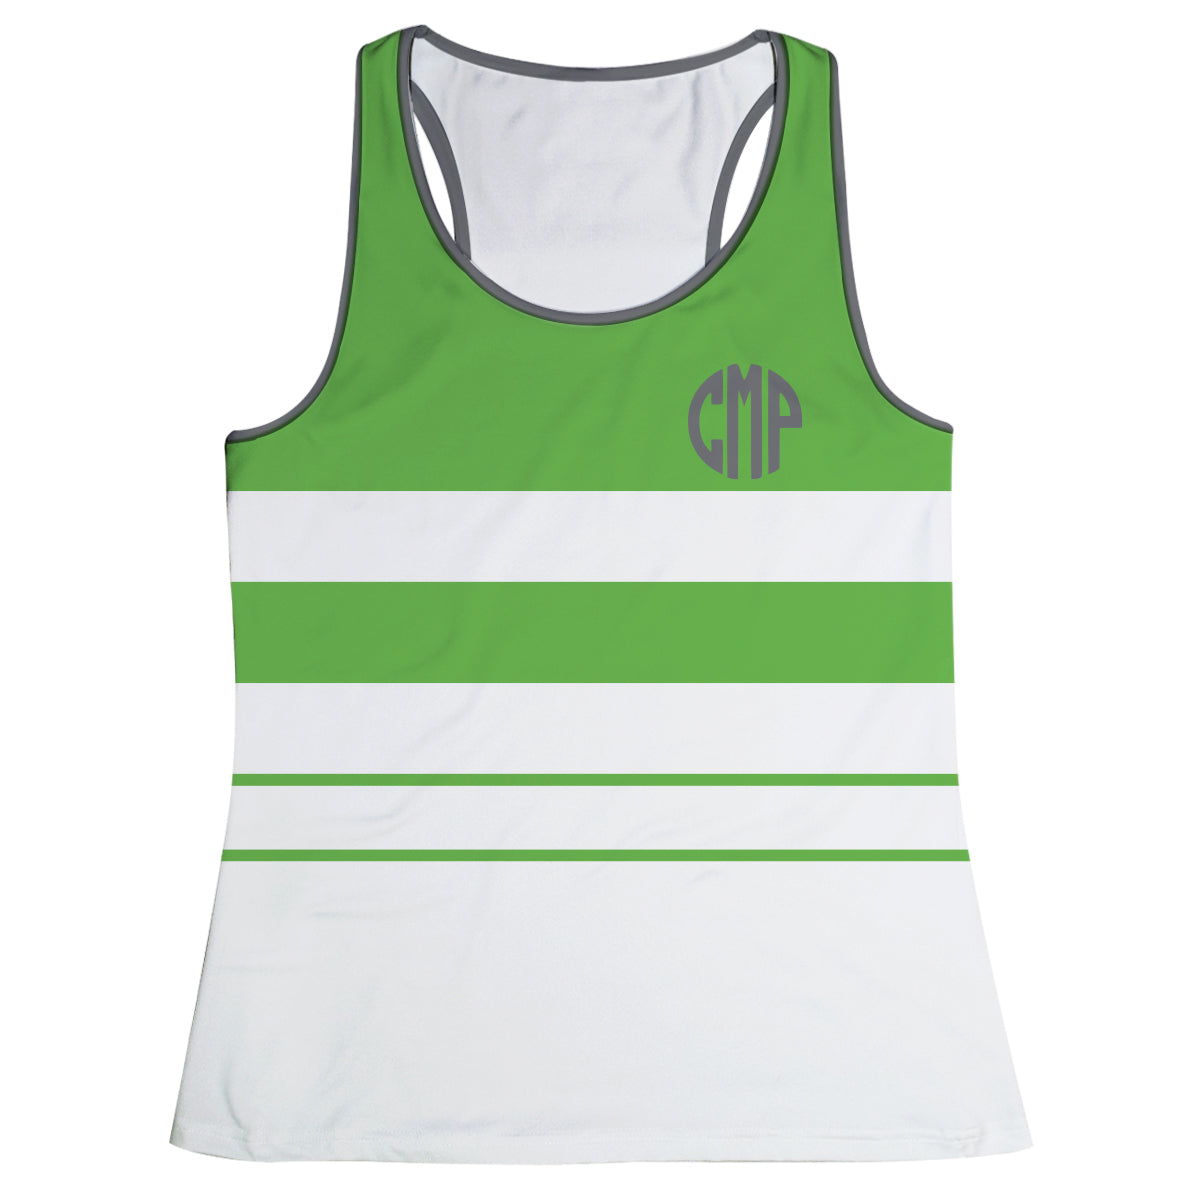 Personalized Monogram White and Green Tank Top